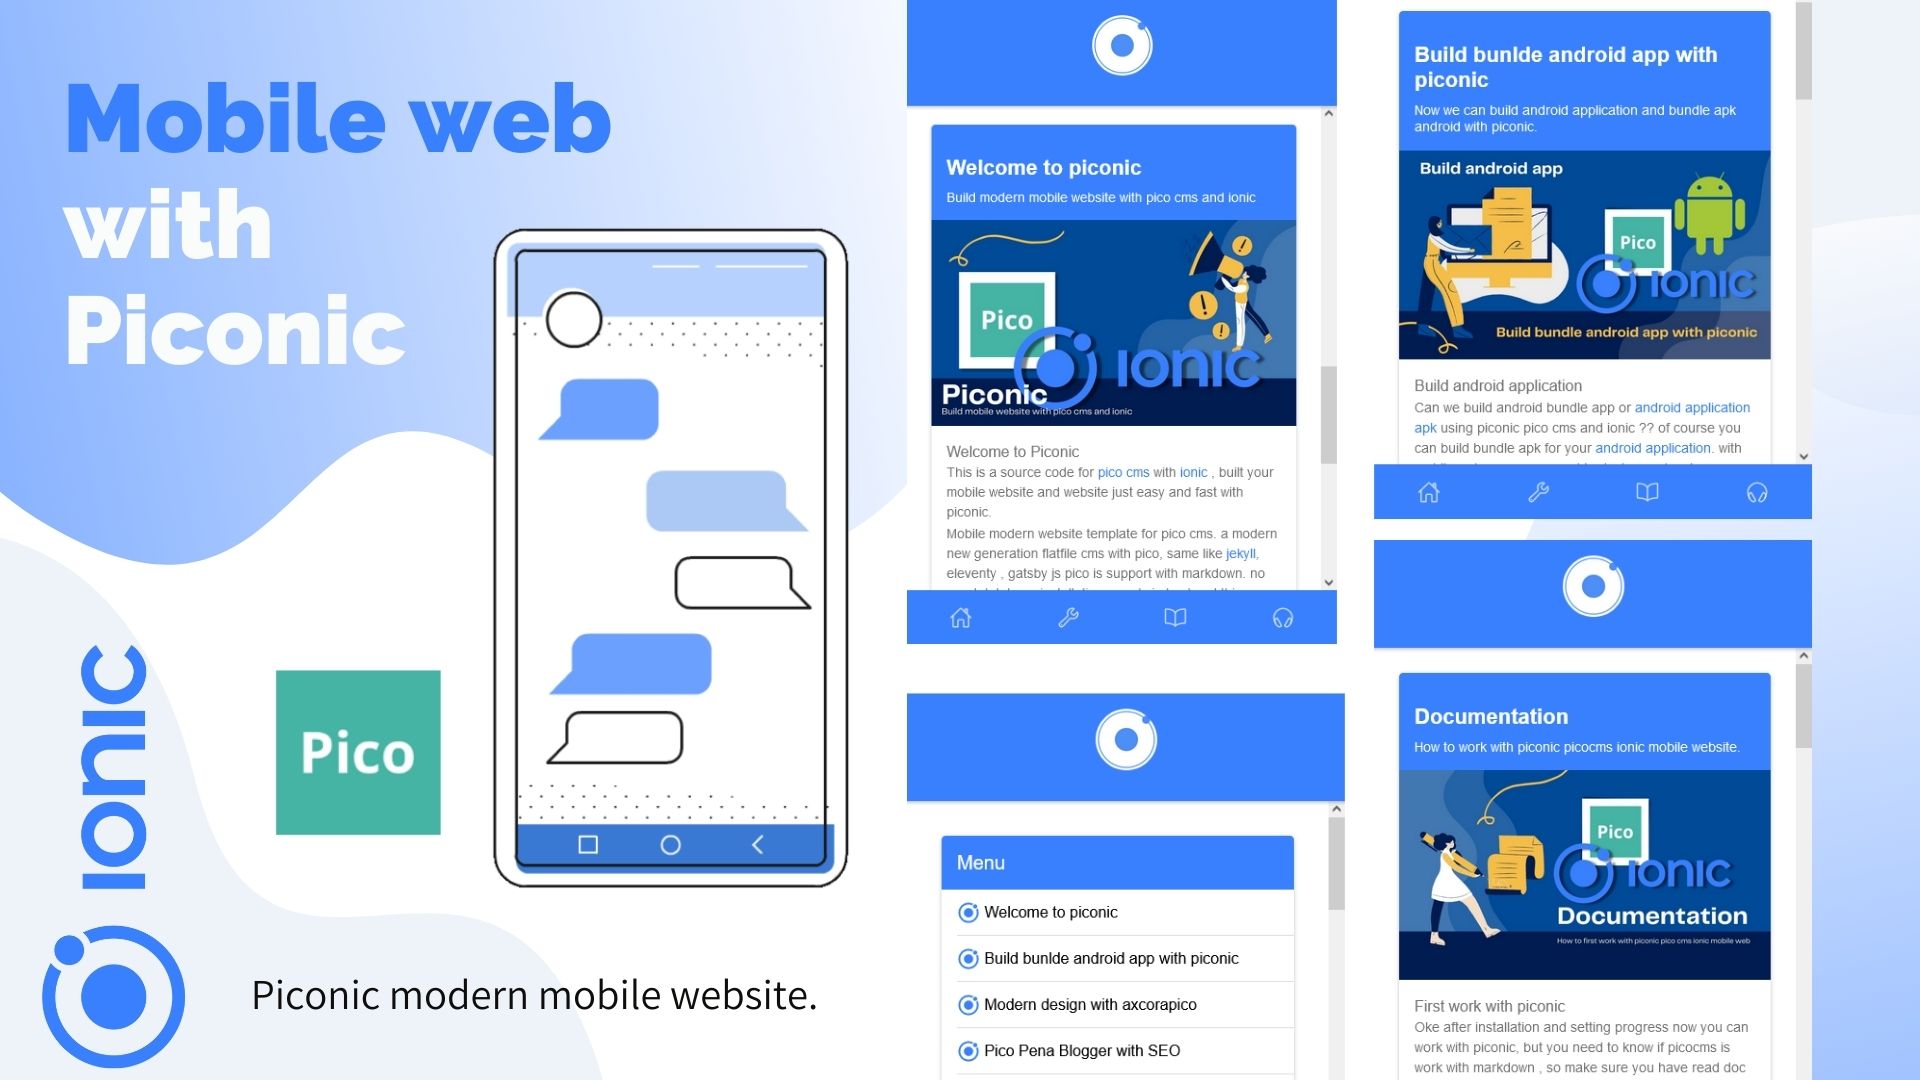 Mobile web template for pico cms with ionic